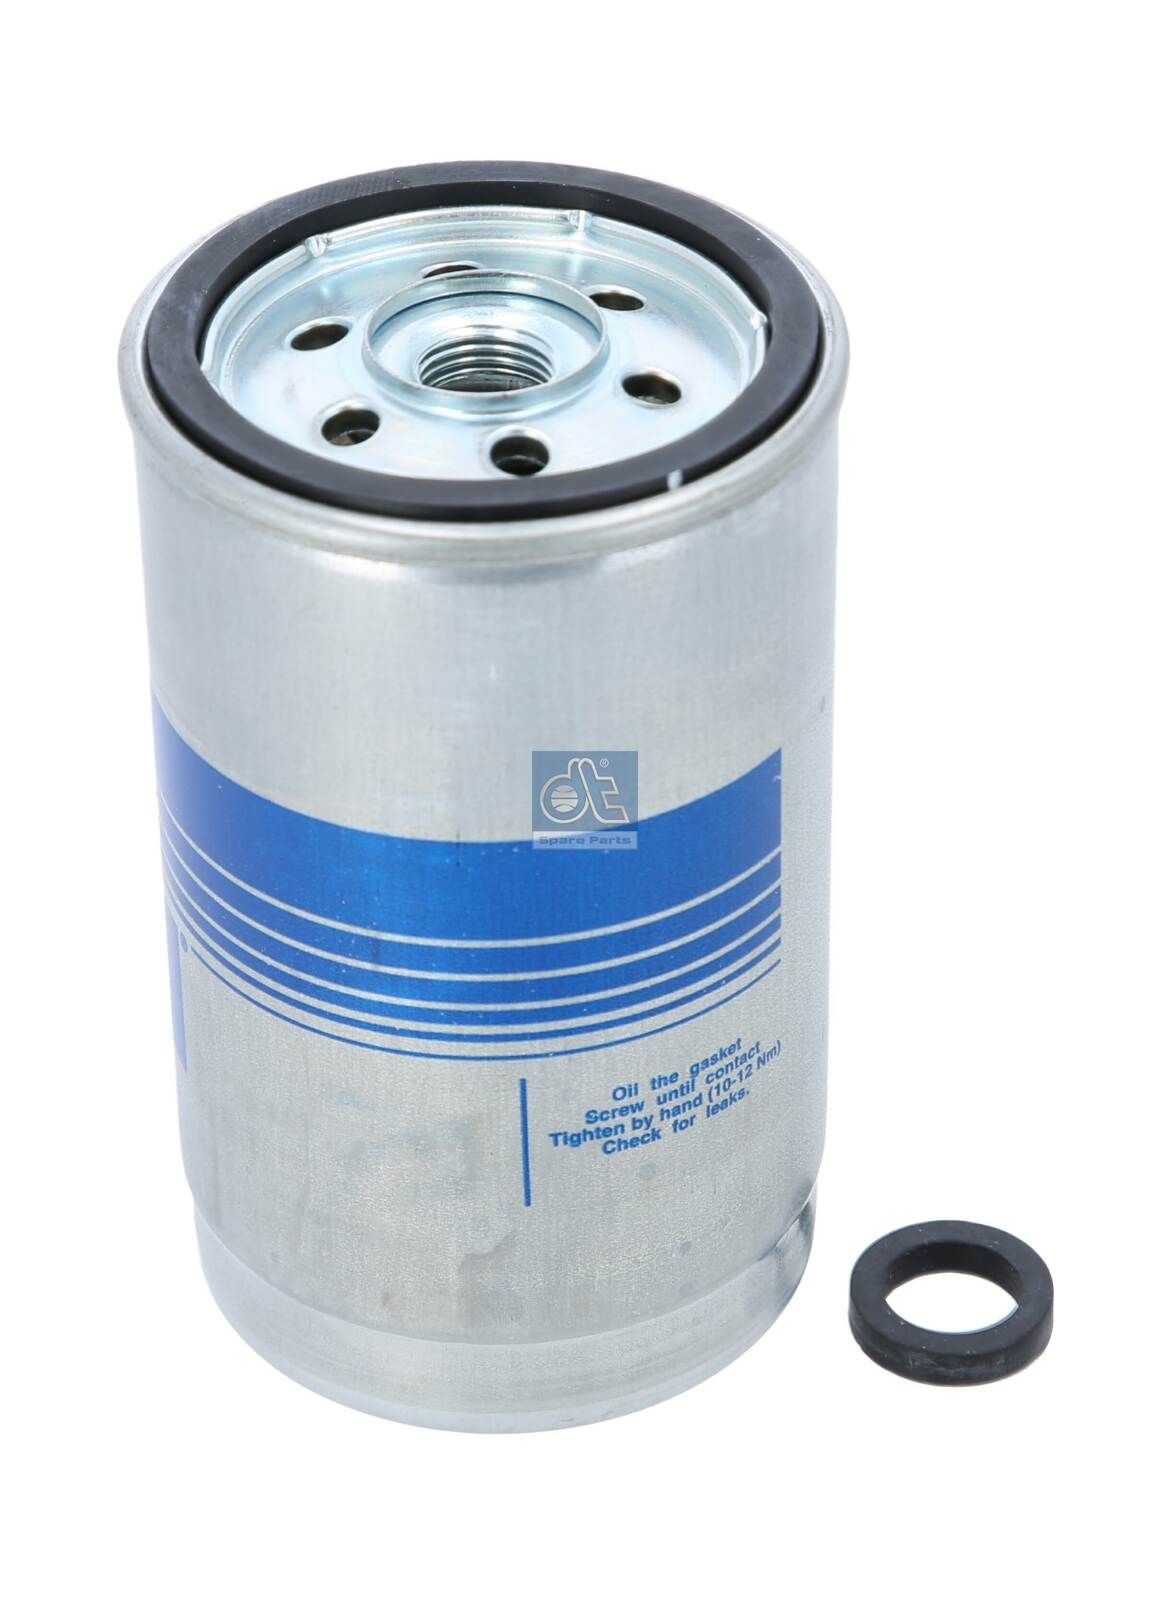 WDK 725 DT Spare Parts 3.22003 Fuel filter 51.12503.0018